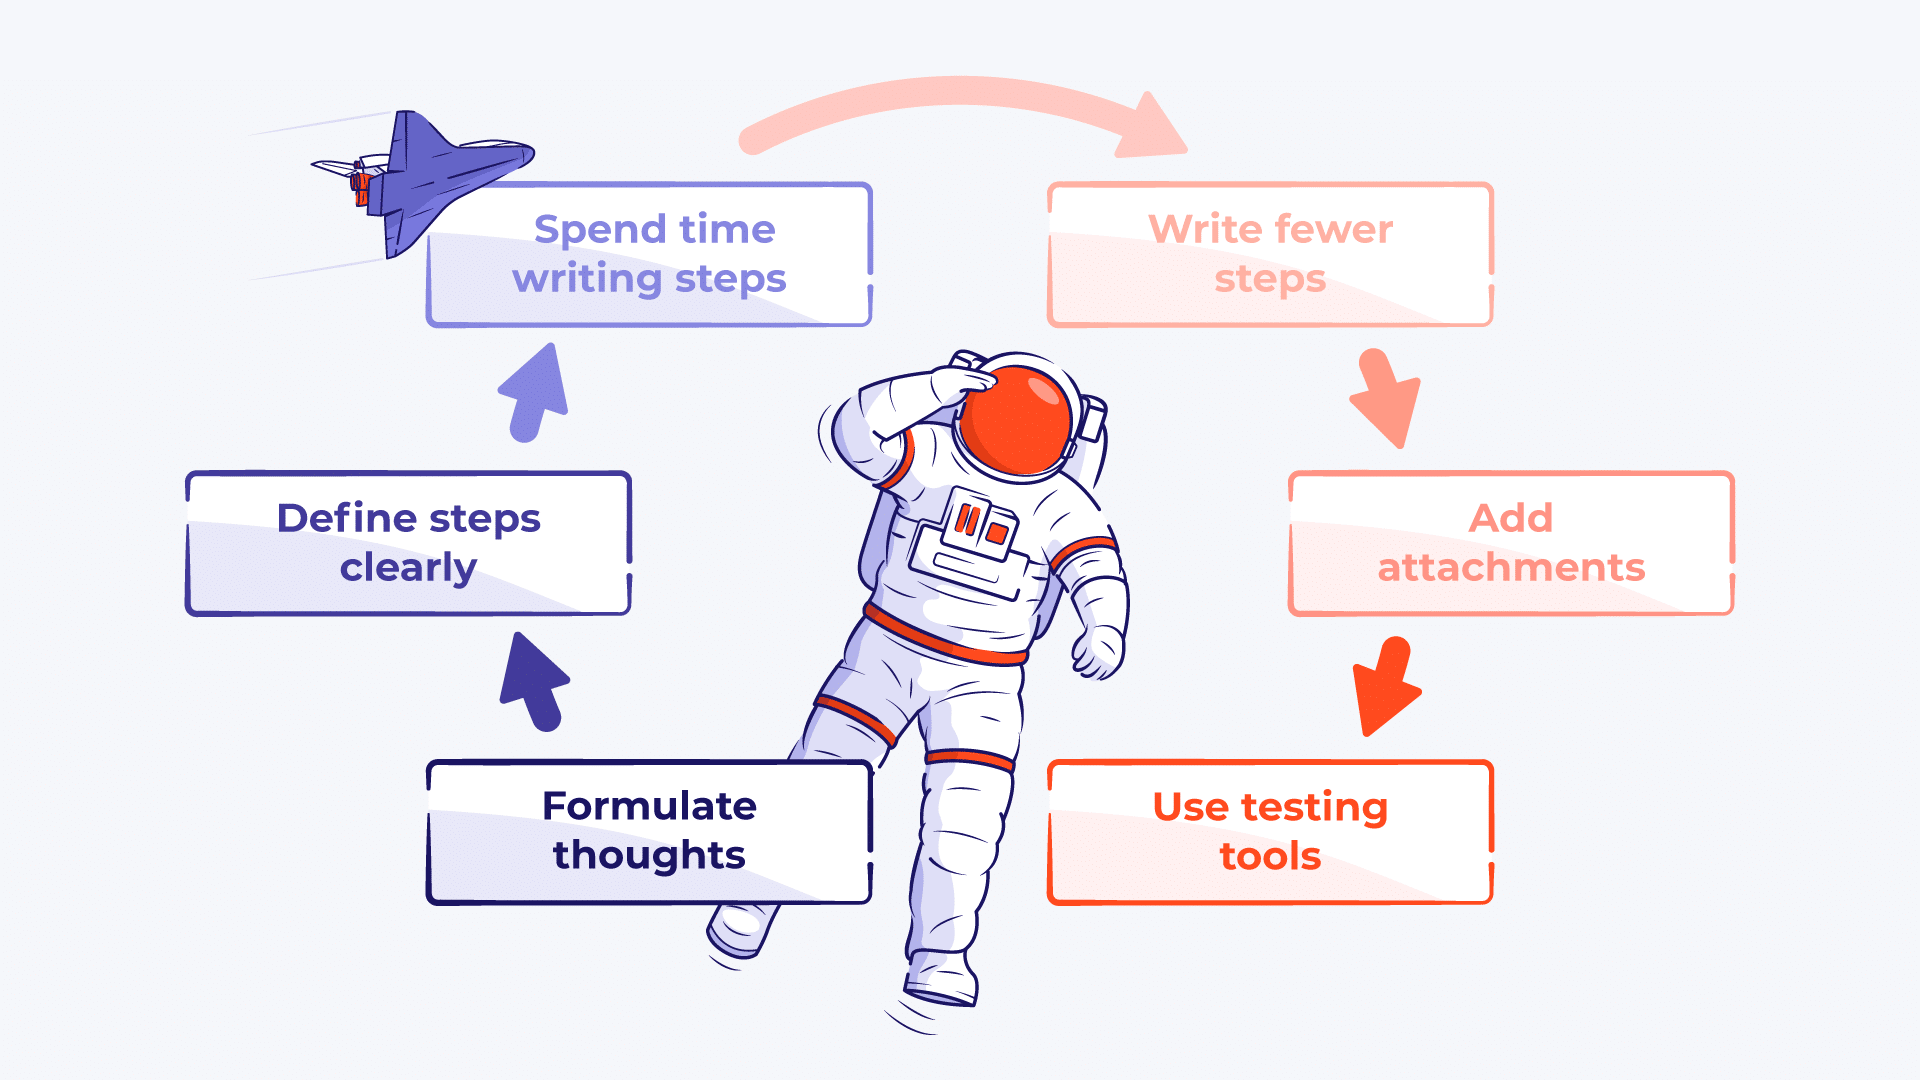 Steps: Spend time writing steps, Write fewer steps, Add attachments, Use testing tools, Formulate thoughts, Define steps clearly.